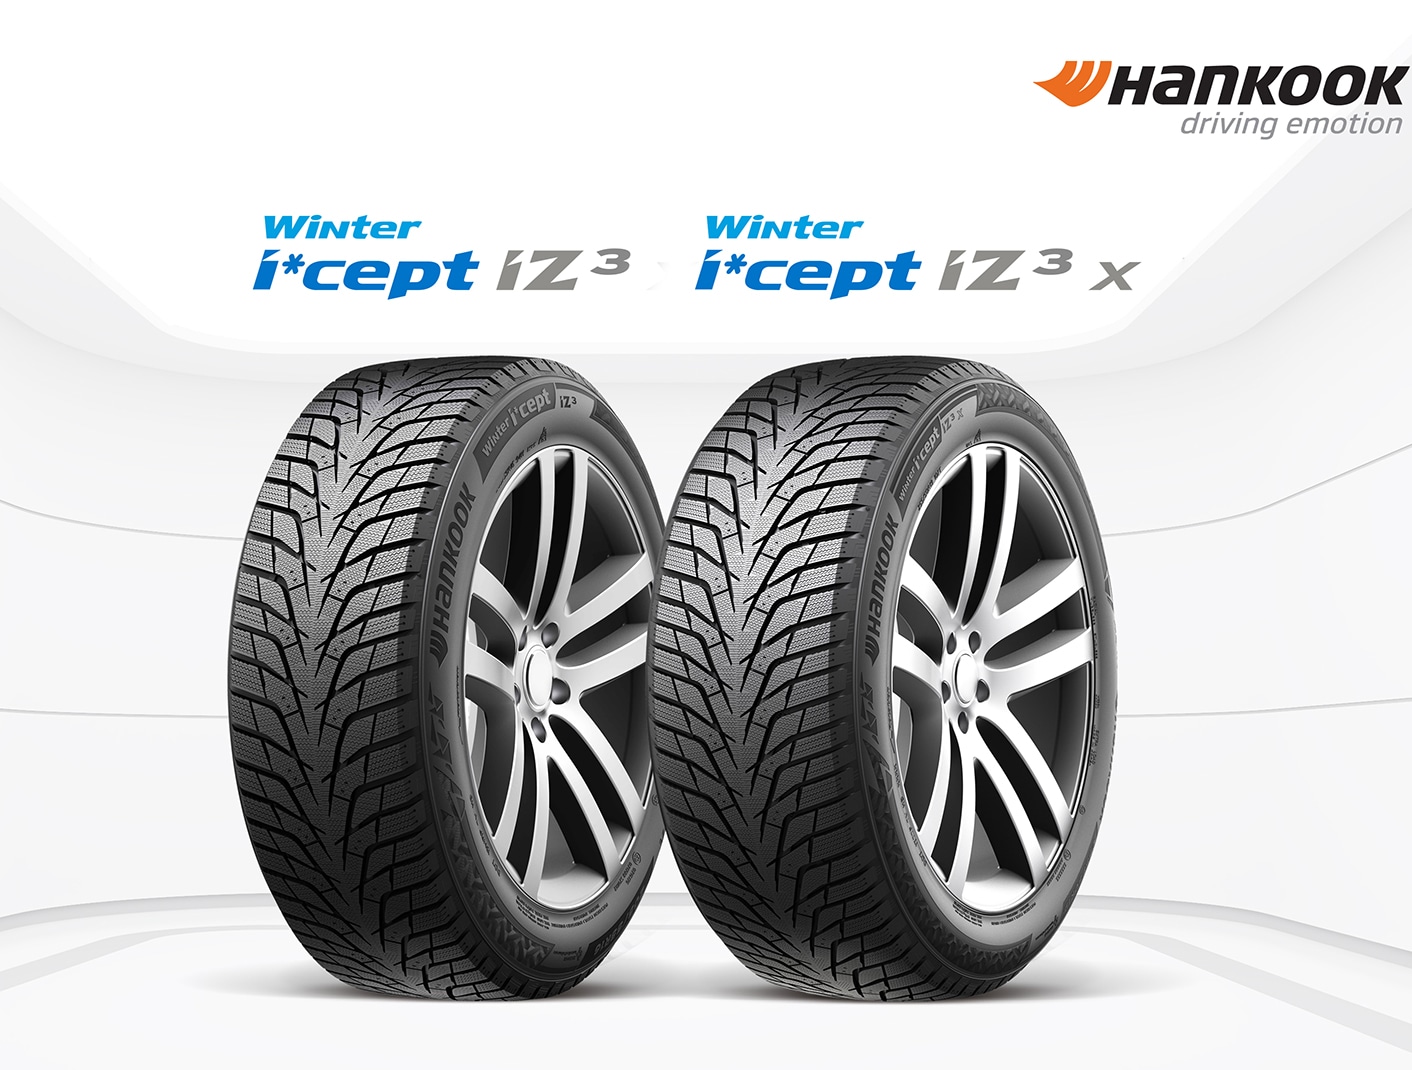 Hankook launches winter tire in the U.S. for enhanced ice control and snow safety